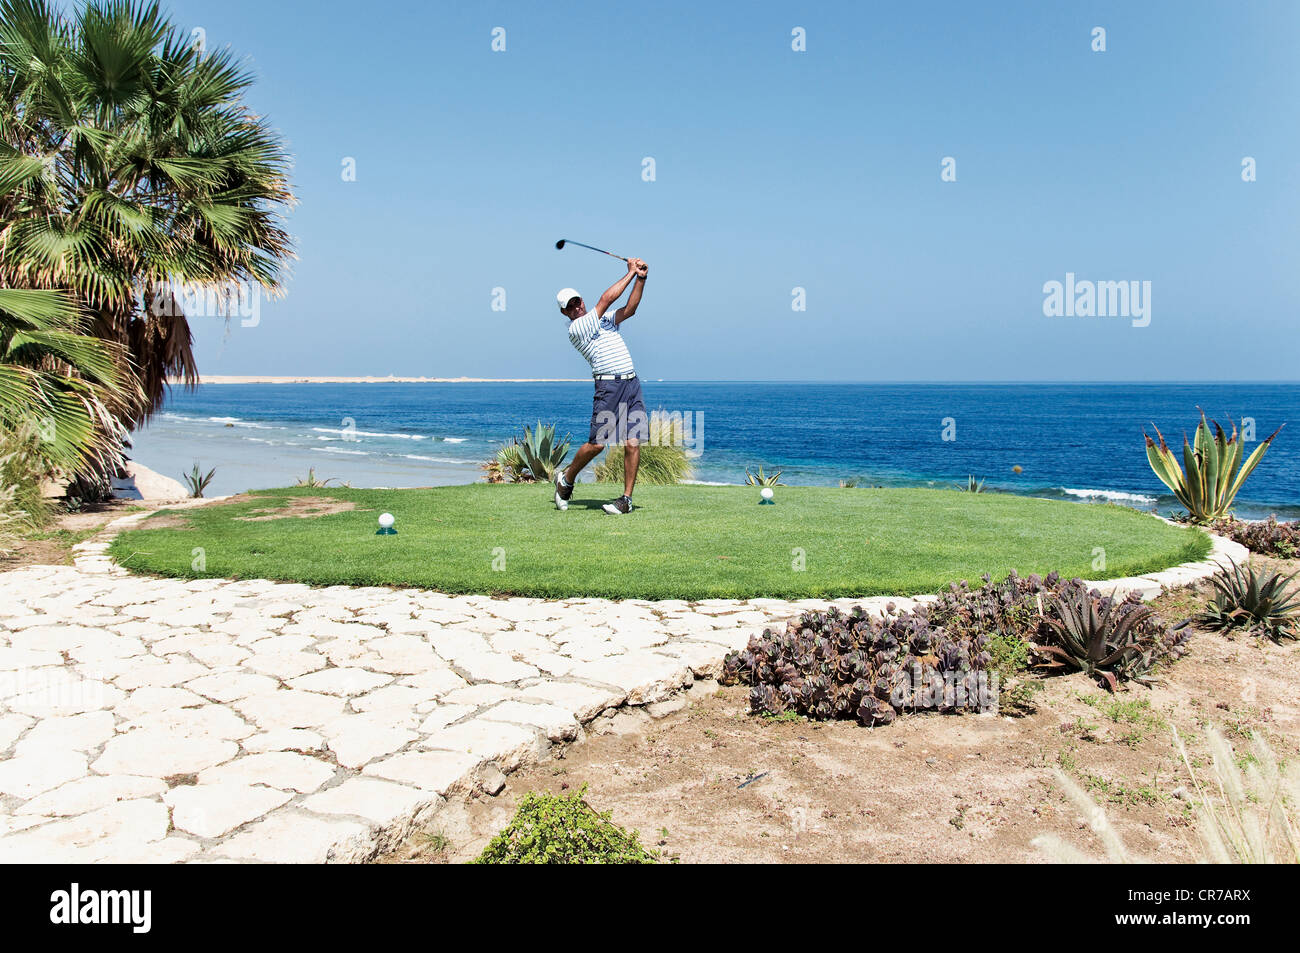 Egypt, Man playing golf on golf course Stock Photo